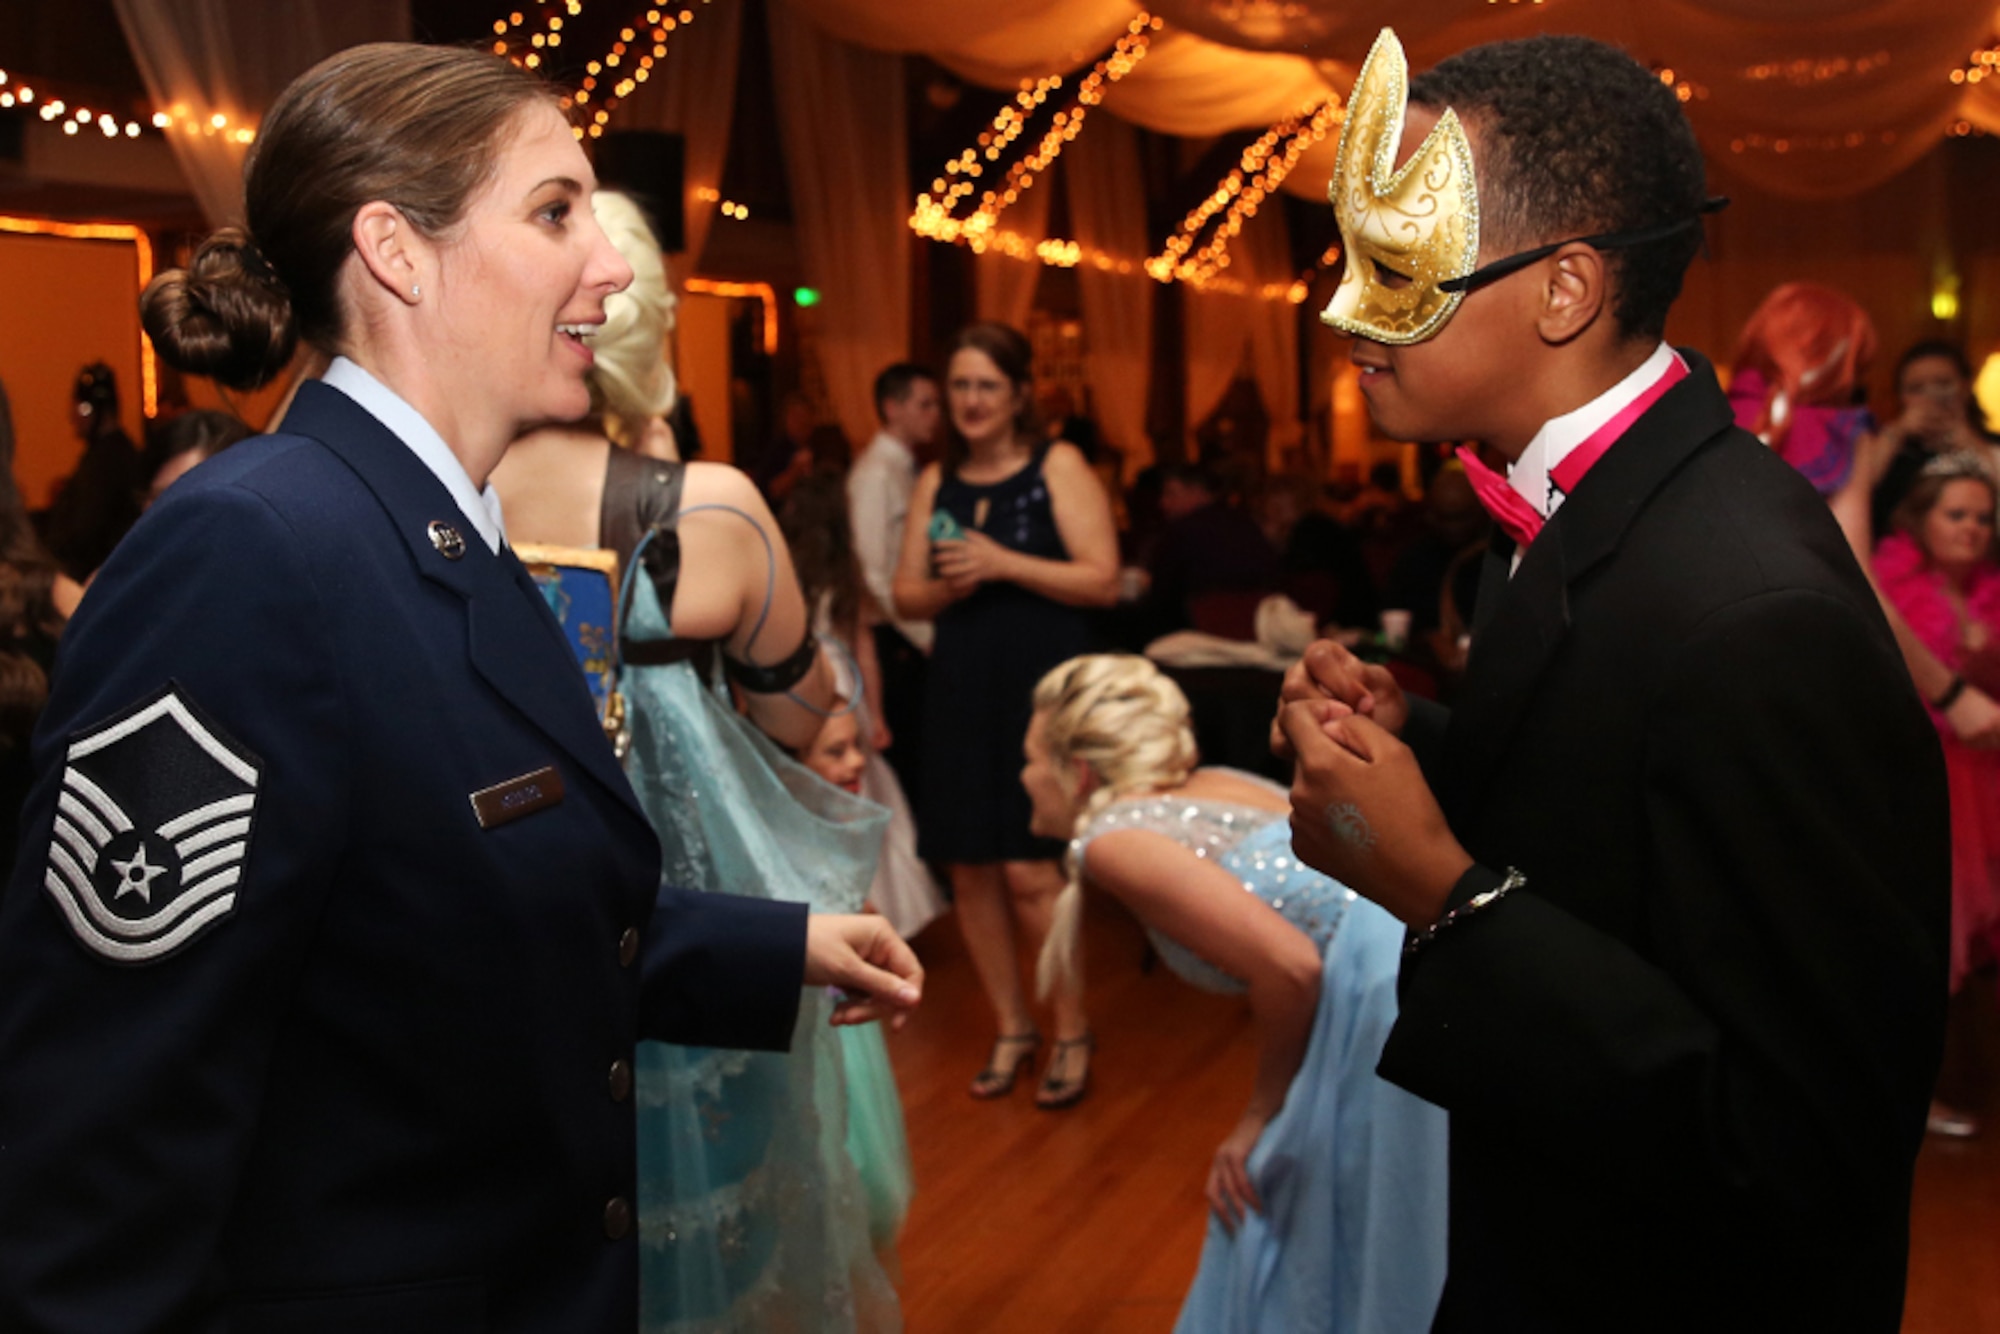 U.S. Air Force Master Sgt. Andre’ Menard, 707th Maintenance Squadron Training Manager, shares a light moment with a guest of honor at the Shriners’ Mardi Gras Ball, Shreveport, La., Feb. 24, 2017.   Menard and other members of the 307th Bomb Wing teamed up with the Shriners and  Margaritaville Resort and Casino, who sponsored the event, to provide children with special needs a night of fun and dancing.   In addition to serving as escorts for the party, members of the wing helped to provide gowns for the children.   (Courtesy photo/released)